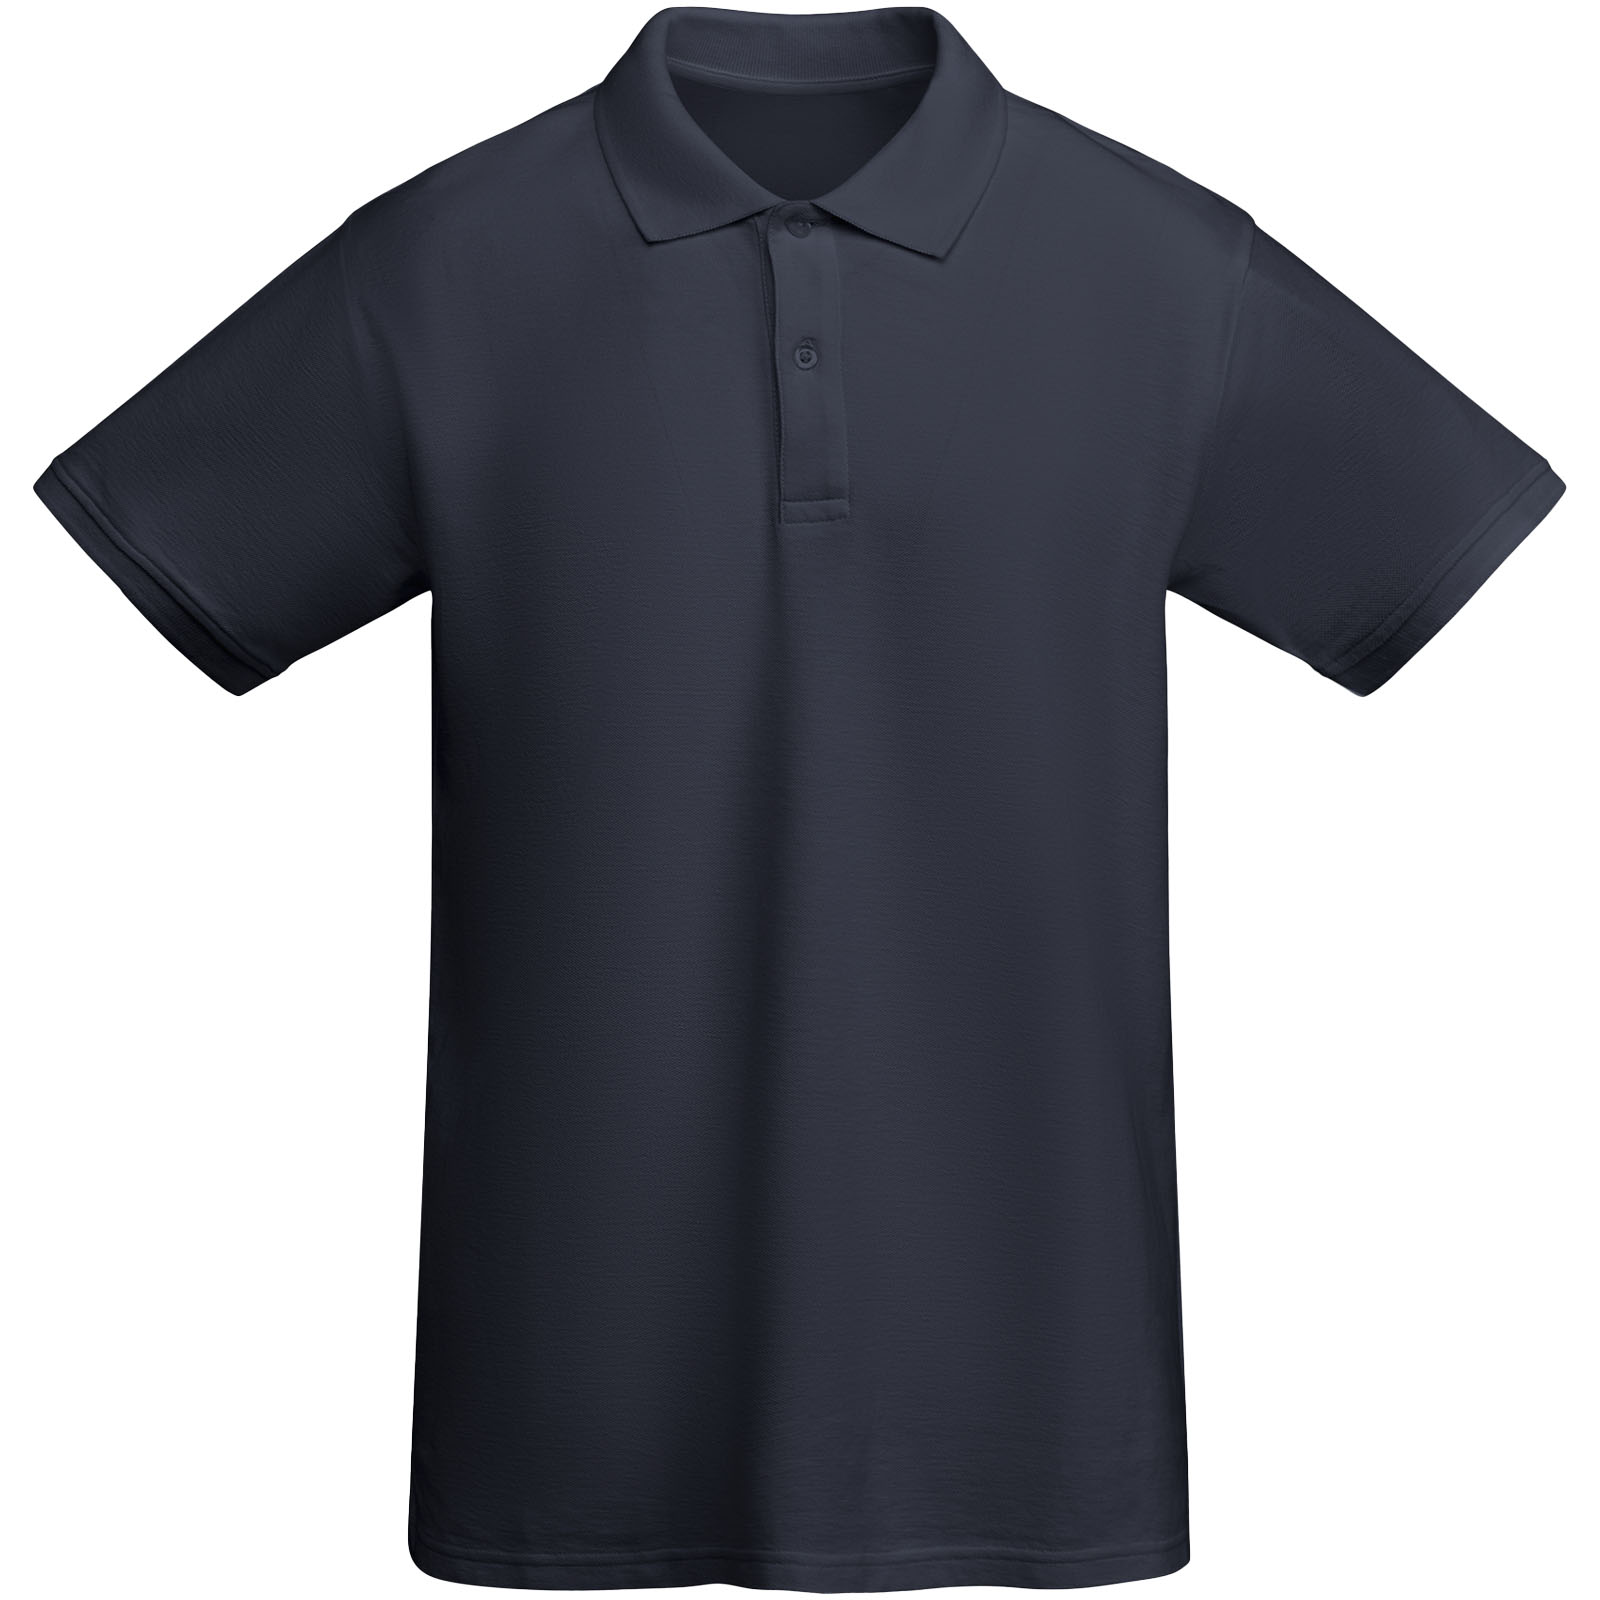 Advertising T-shirts - Prince short sleeve men's polo